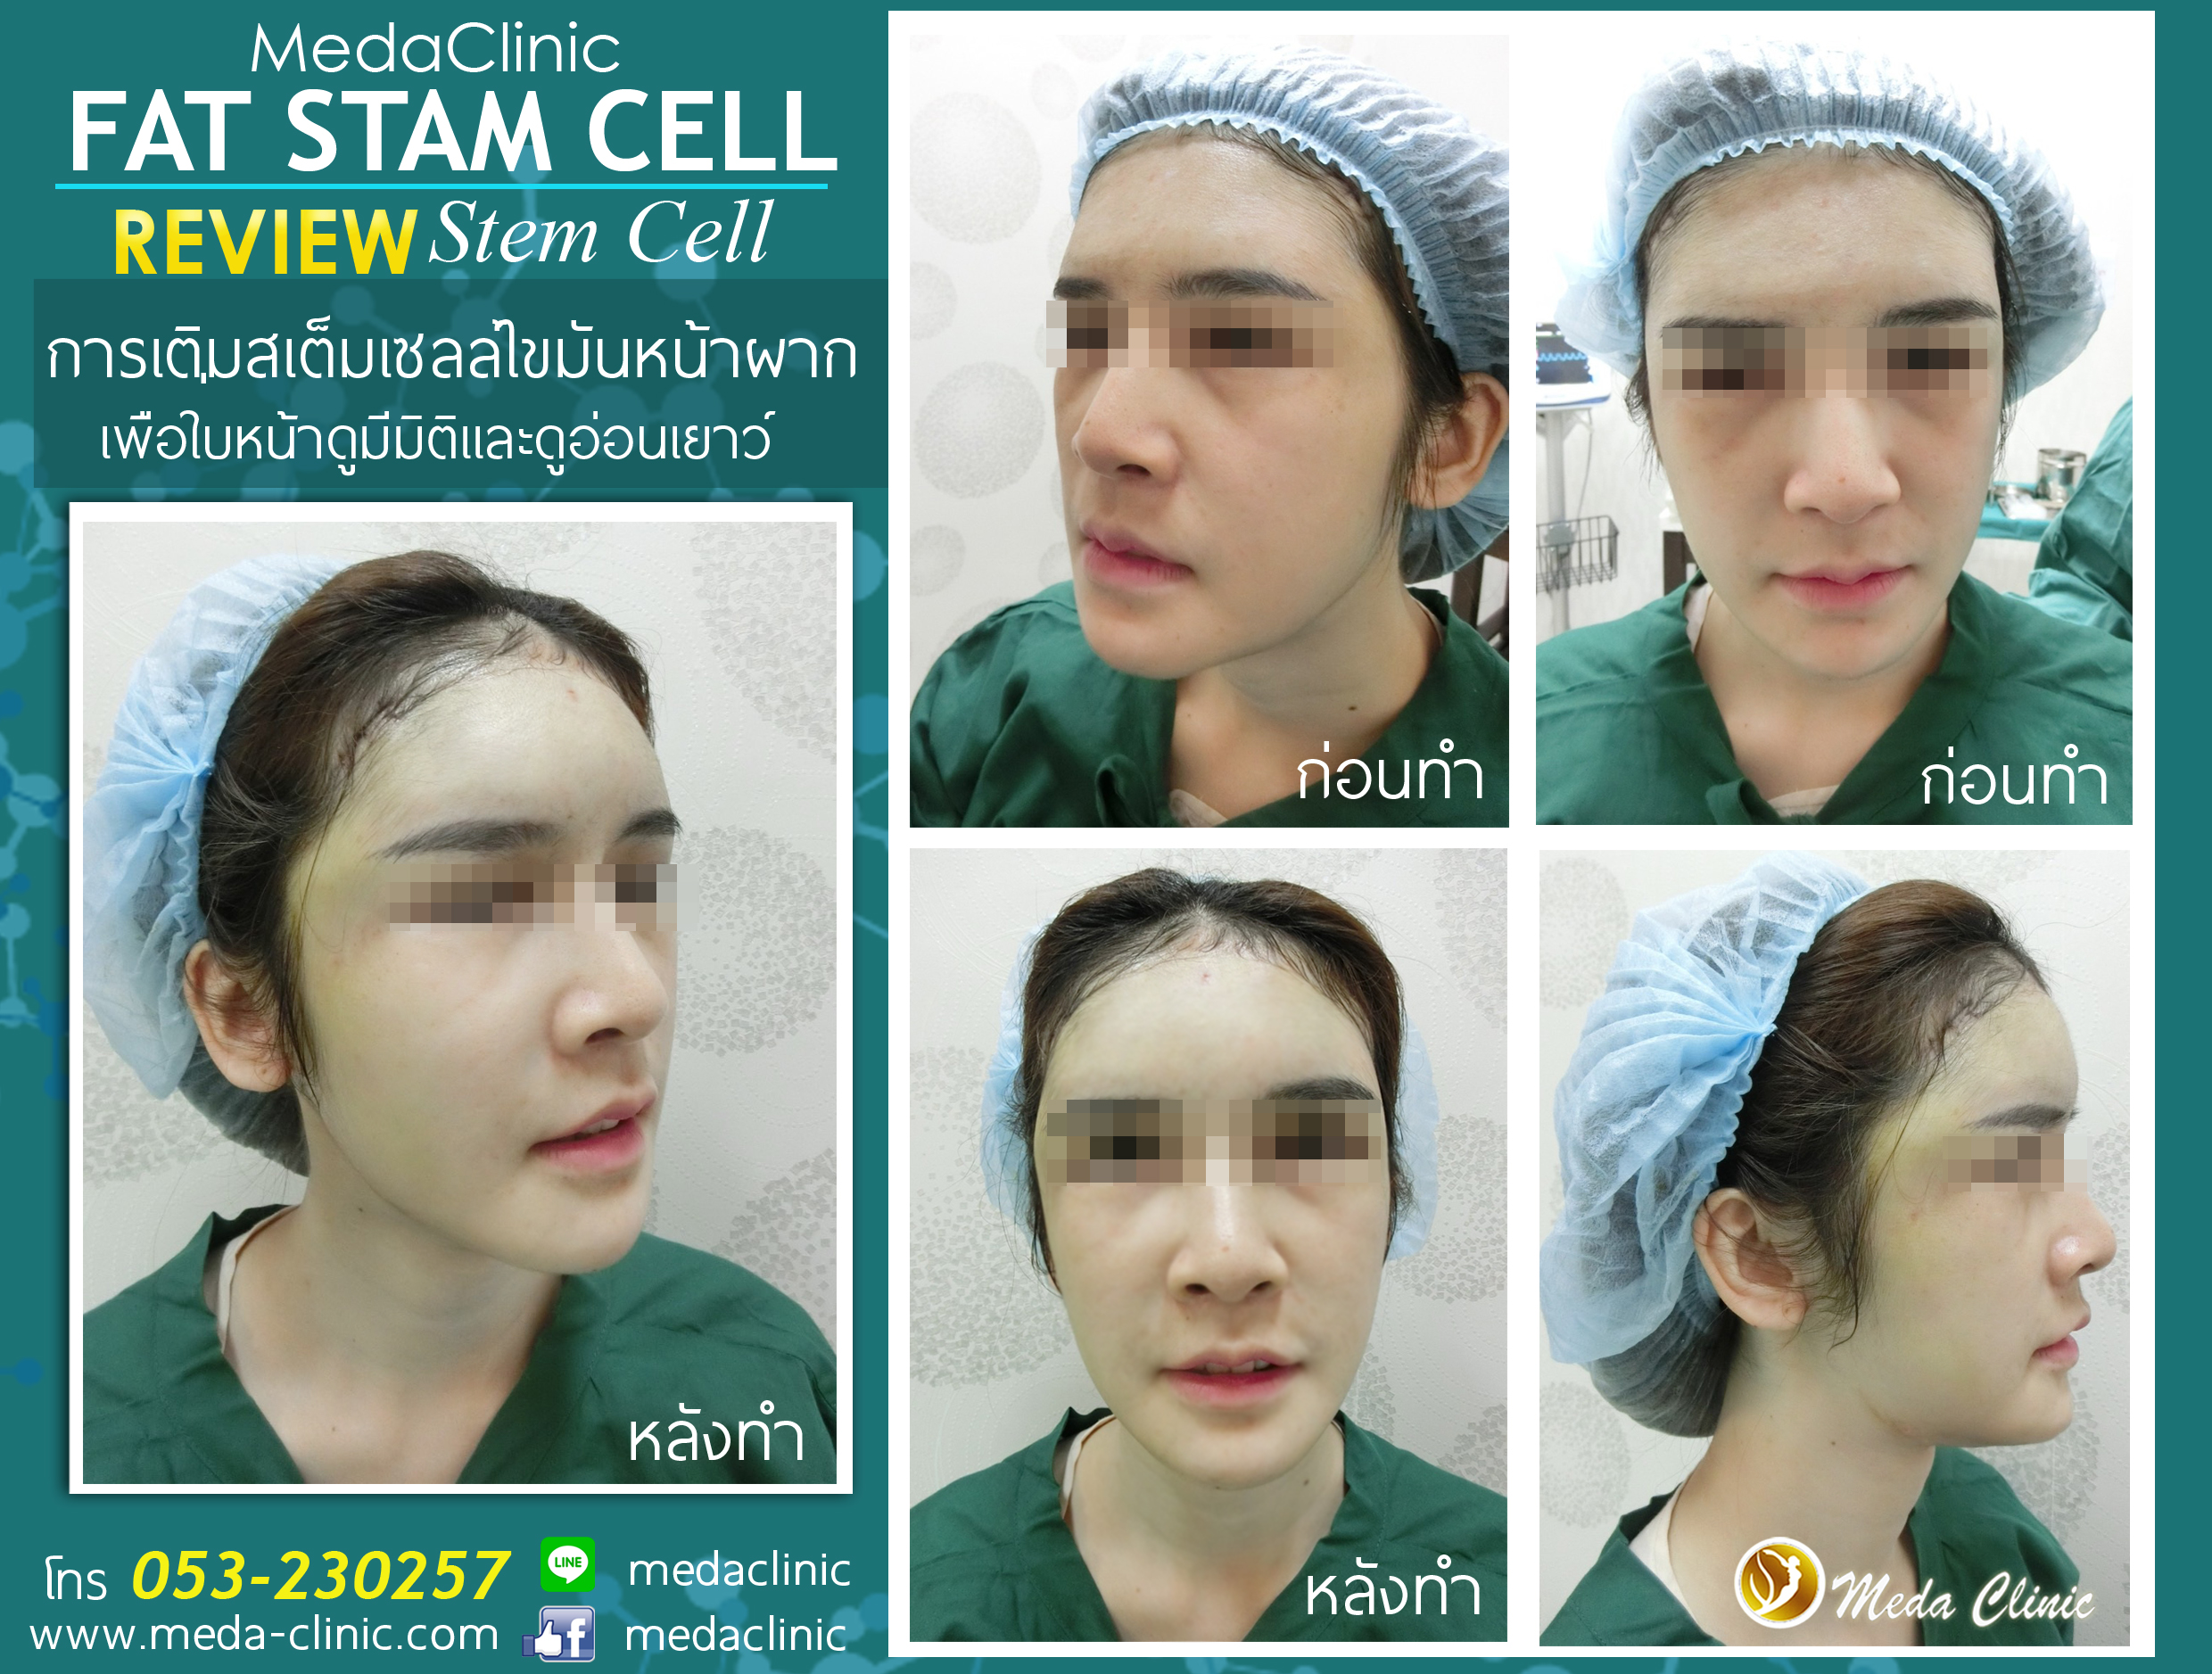 review Stem Cell ผากเคส 2 copy